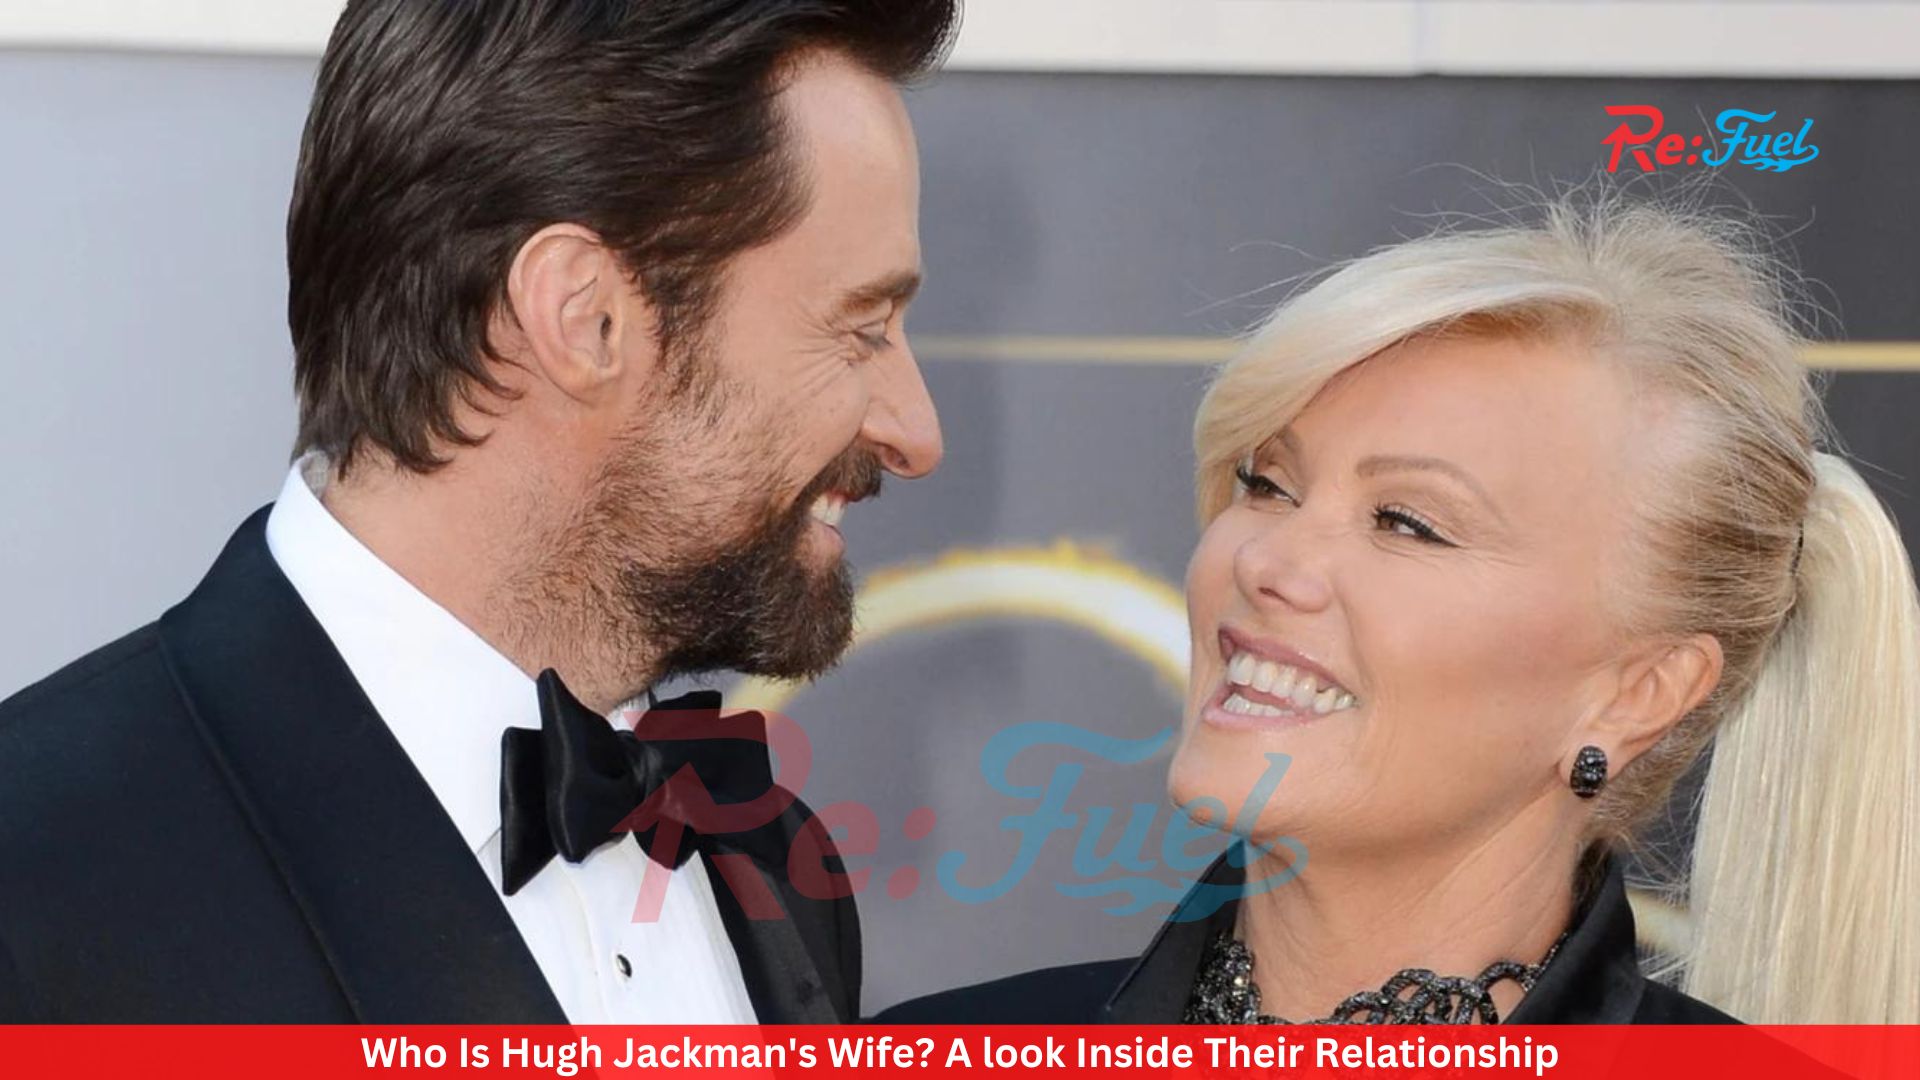 Who Is Hugh Jackman's Wife? A look Inside Their Relationship